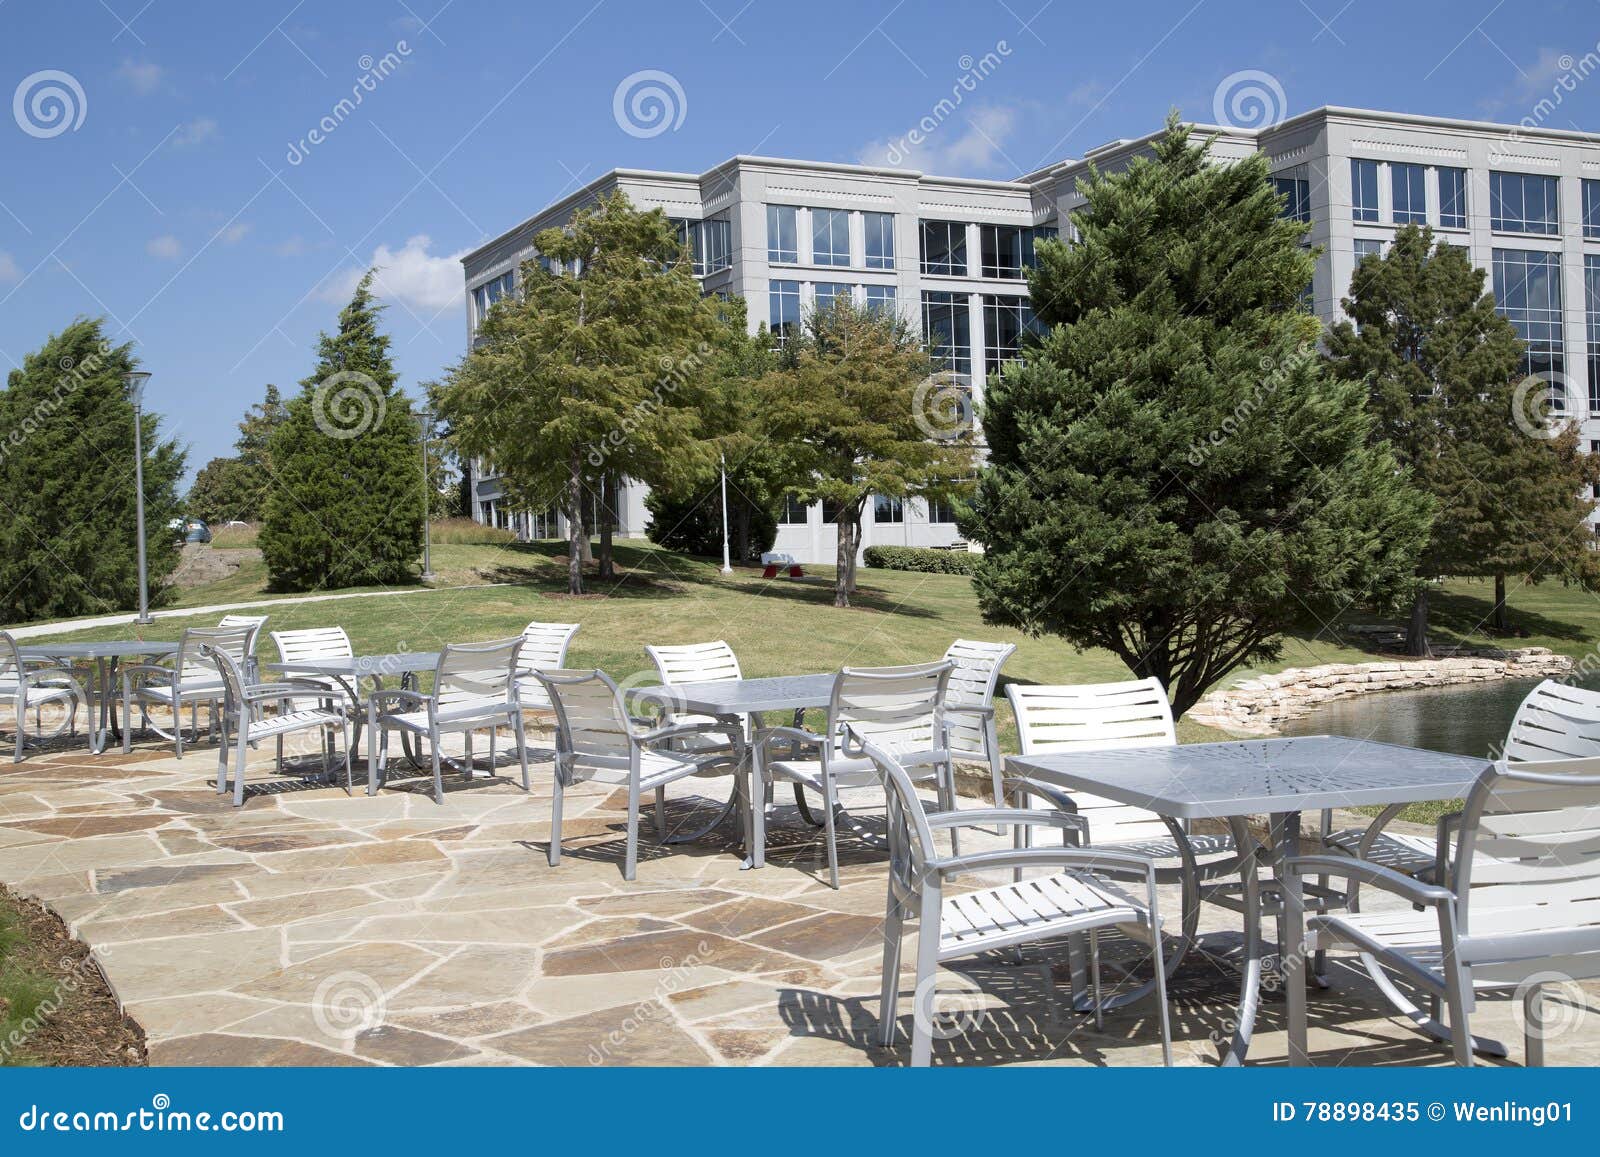 Outdoor Architecture Tables And Chairs Stock Image Image Of